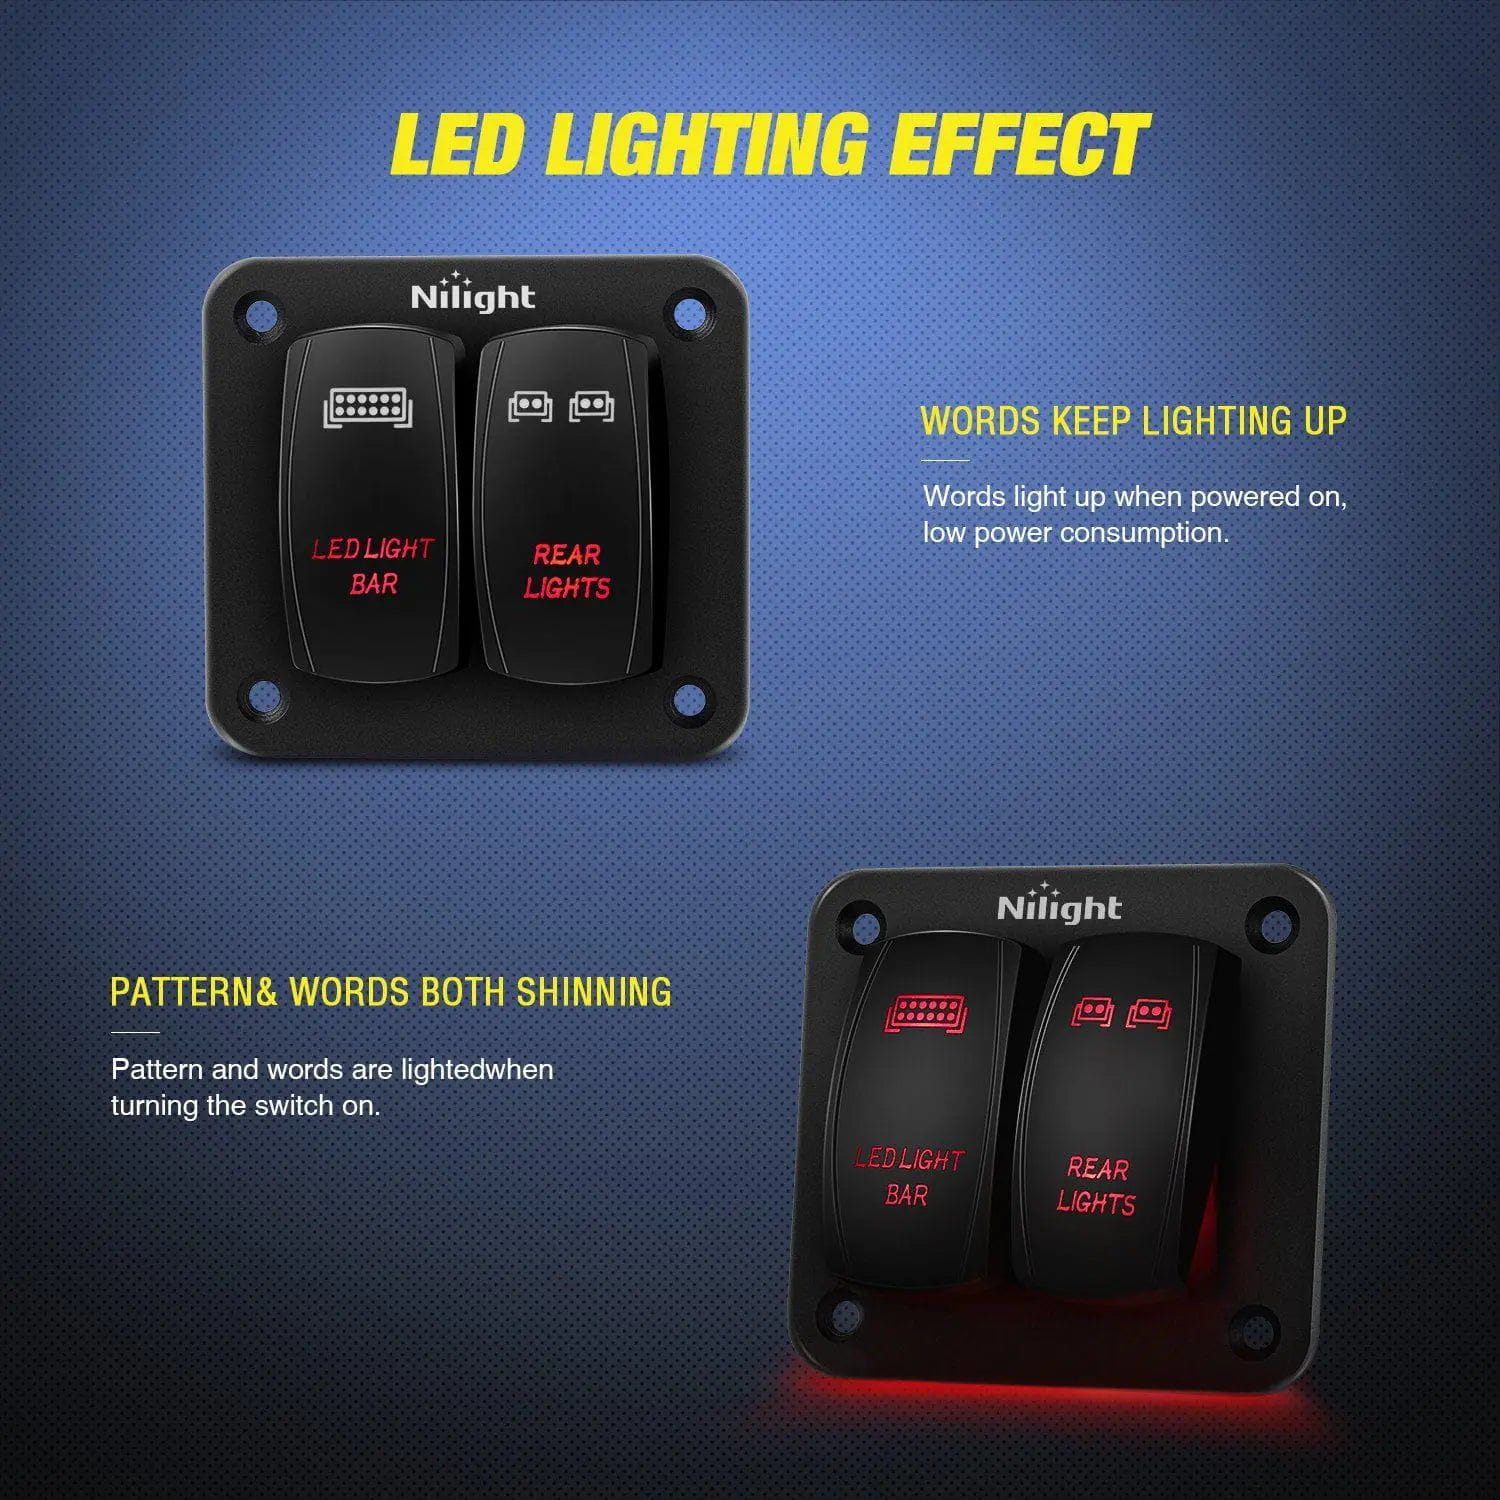 Rocker Switch 2Gang Led Light Bar and Rear Lights 5Pin ON/Off Rocker Switch Panel Red